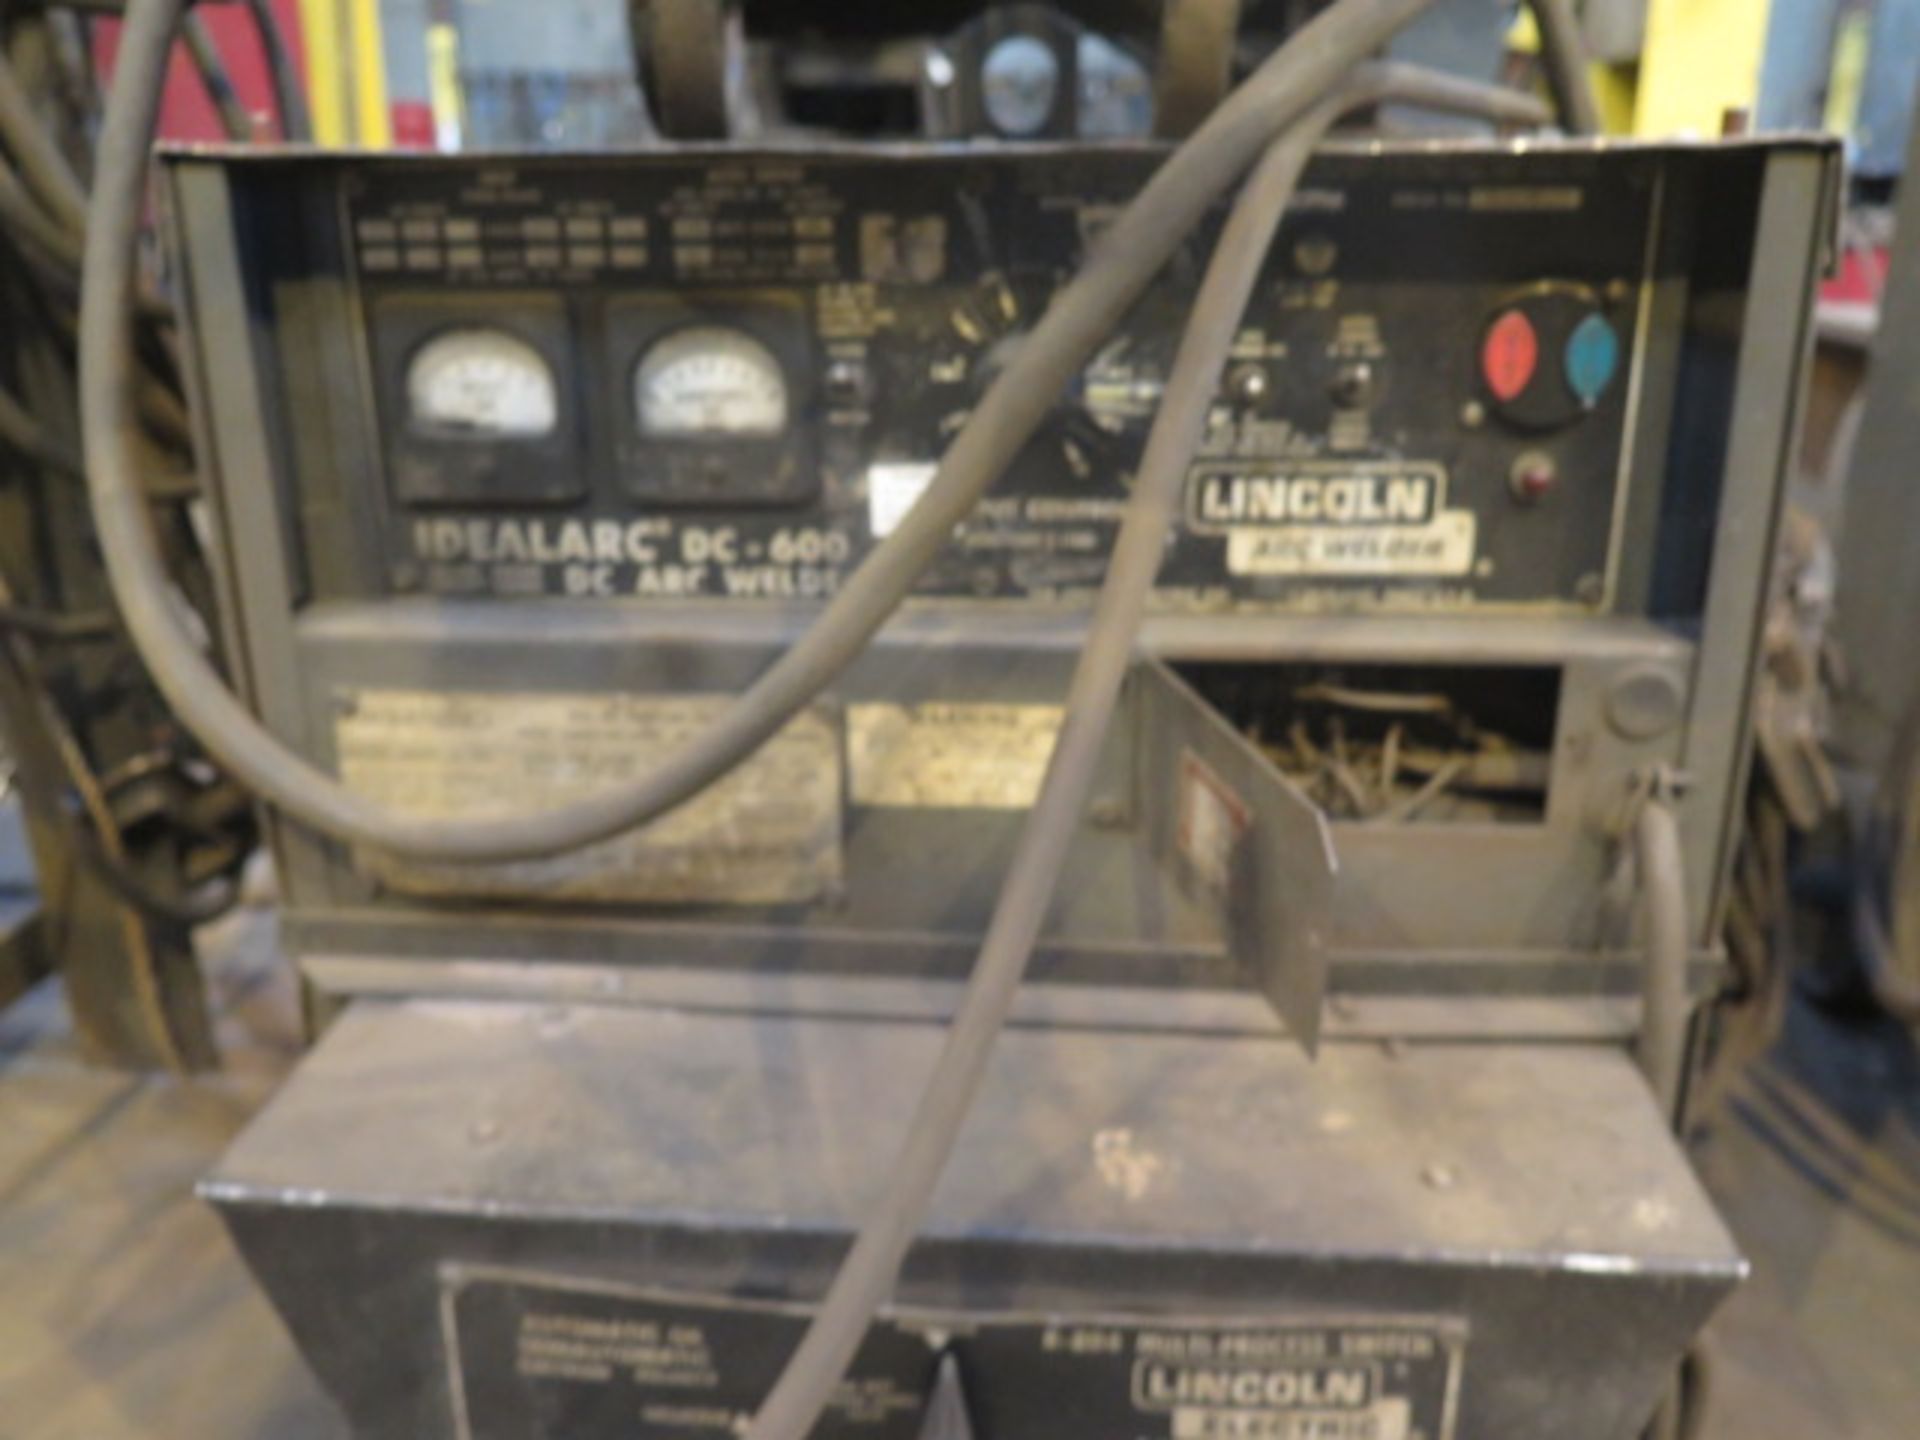 Lincoln Idealarc DC-600 VV-CV DC Arc Welding Power Source w/ Lincoln LN-7 Wire Feeder - Image 4 of 4